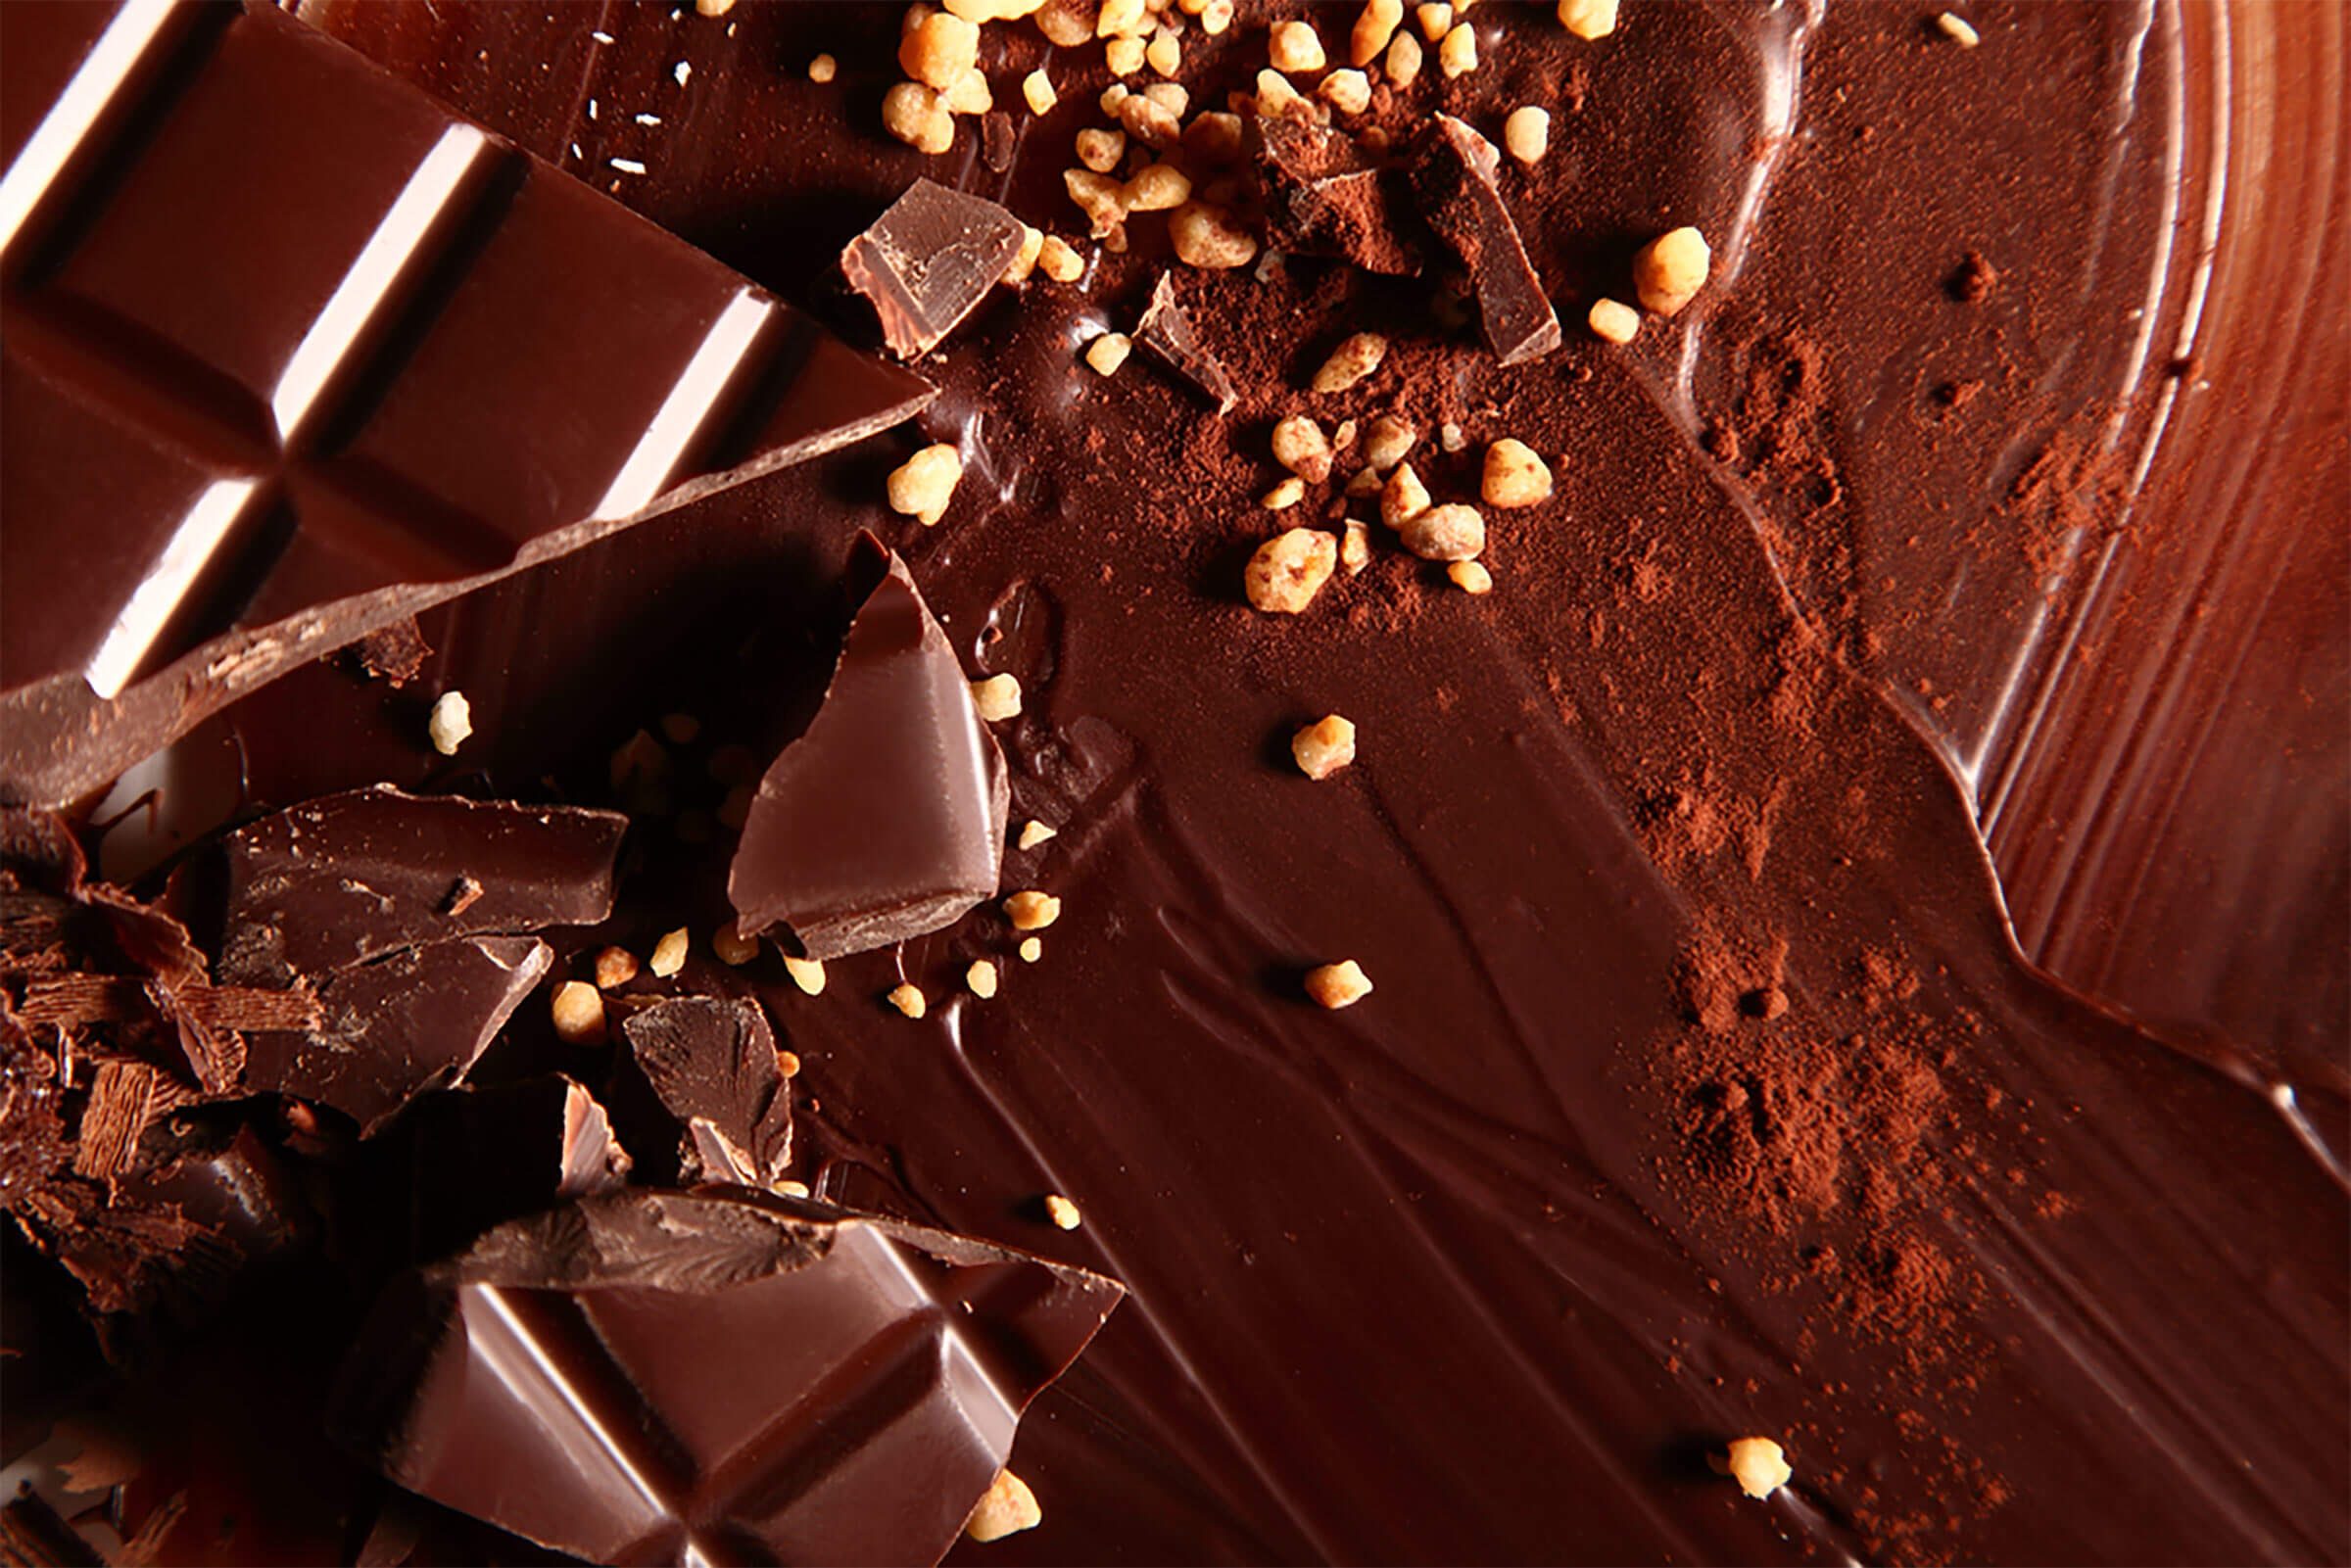 Here's What You Need to Know About the Health Benefits of Chocolate